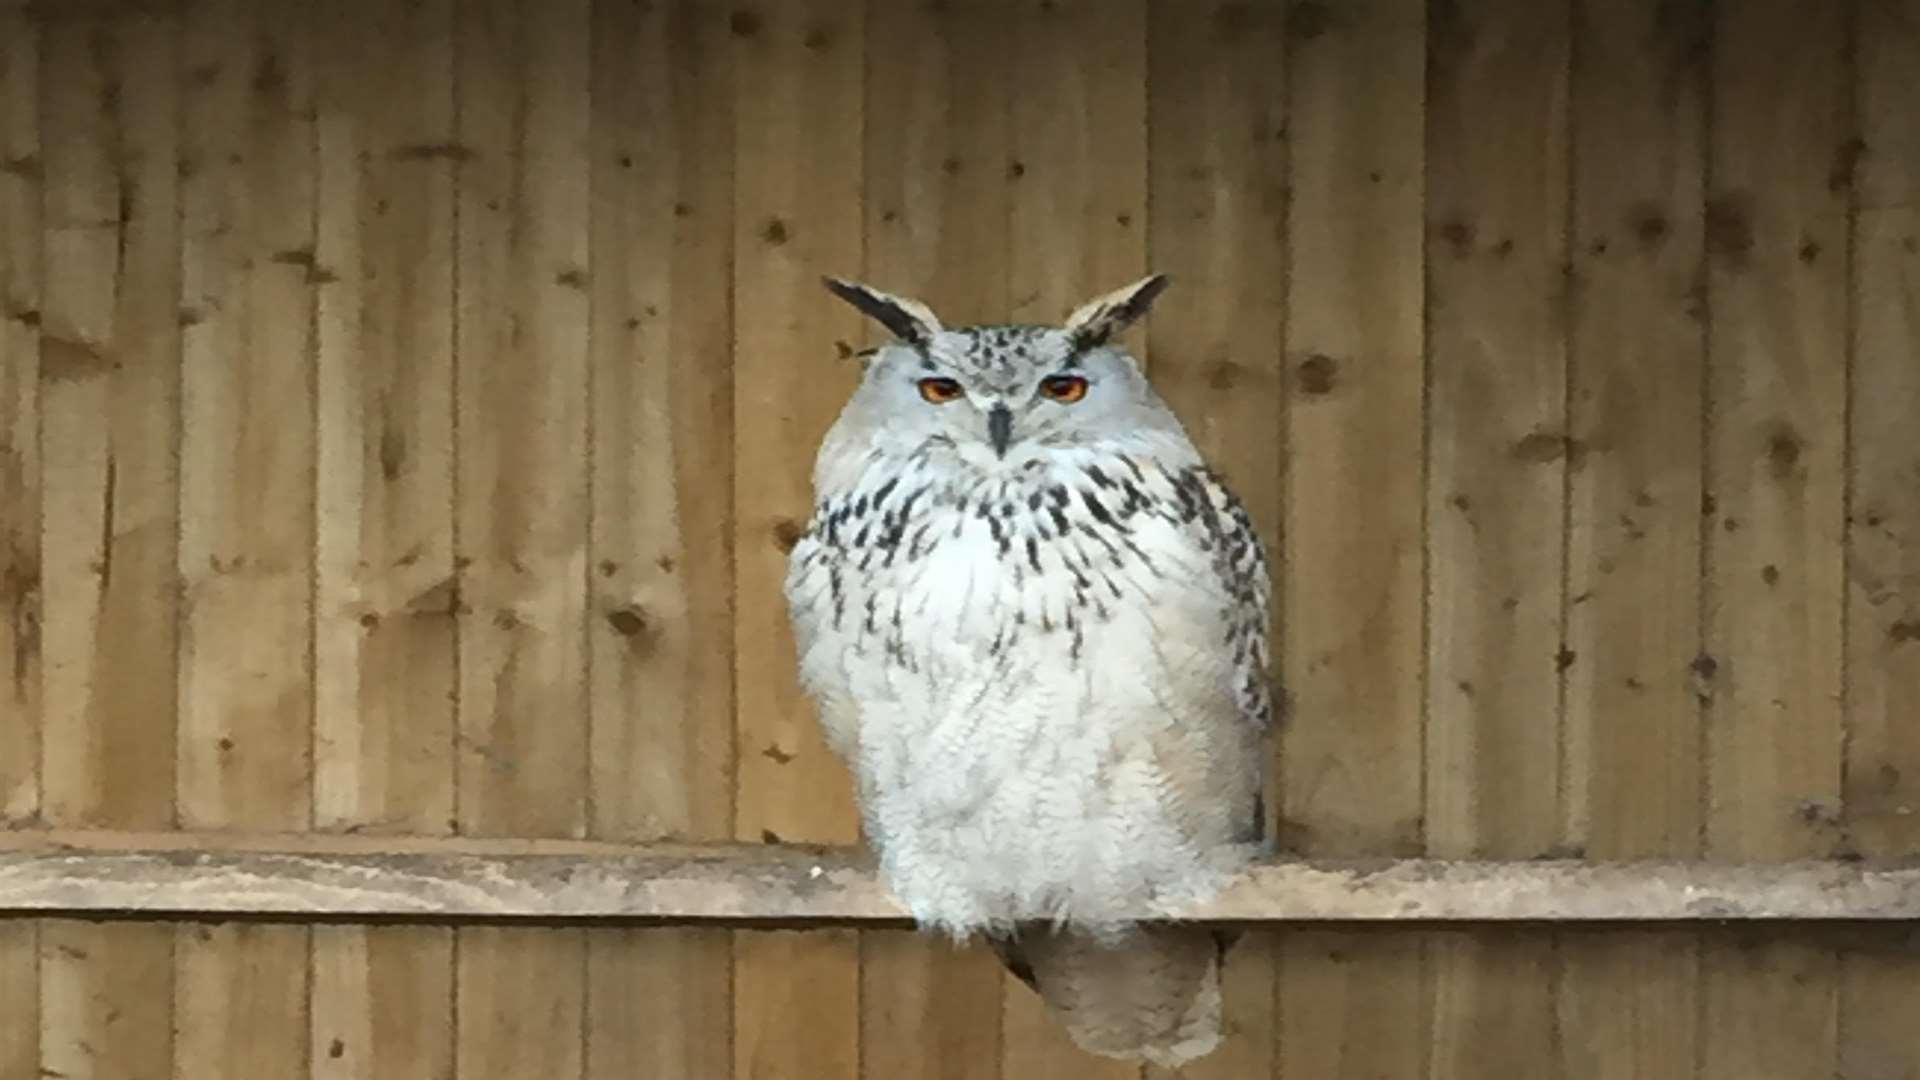 One of the missing owls